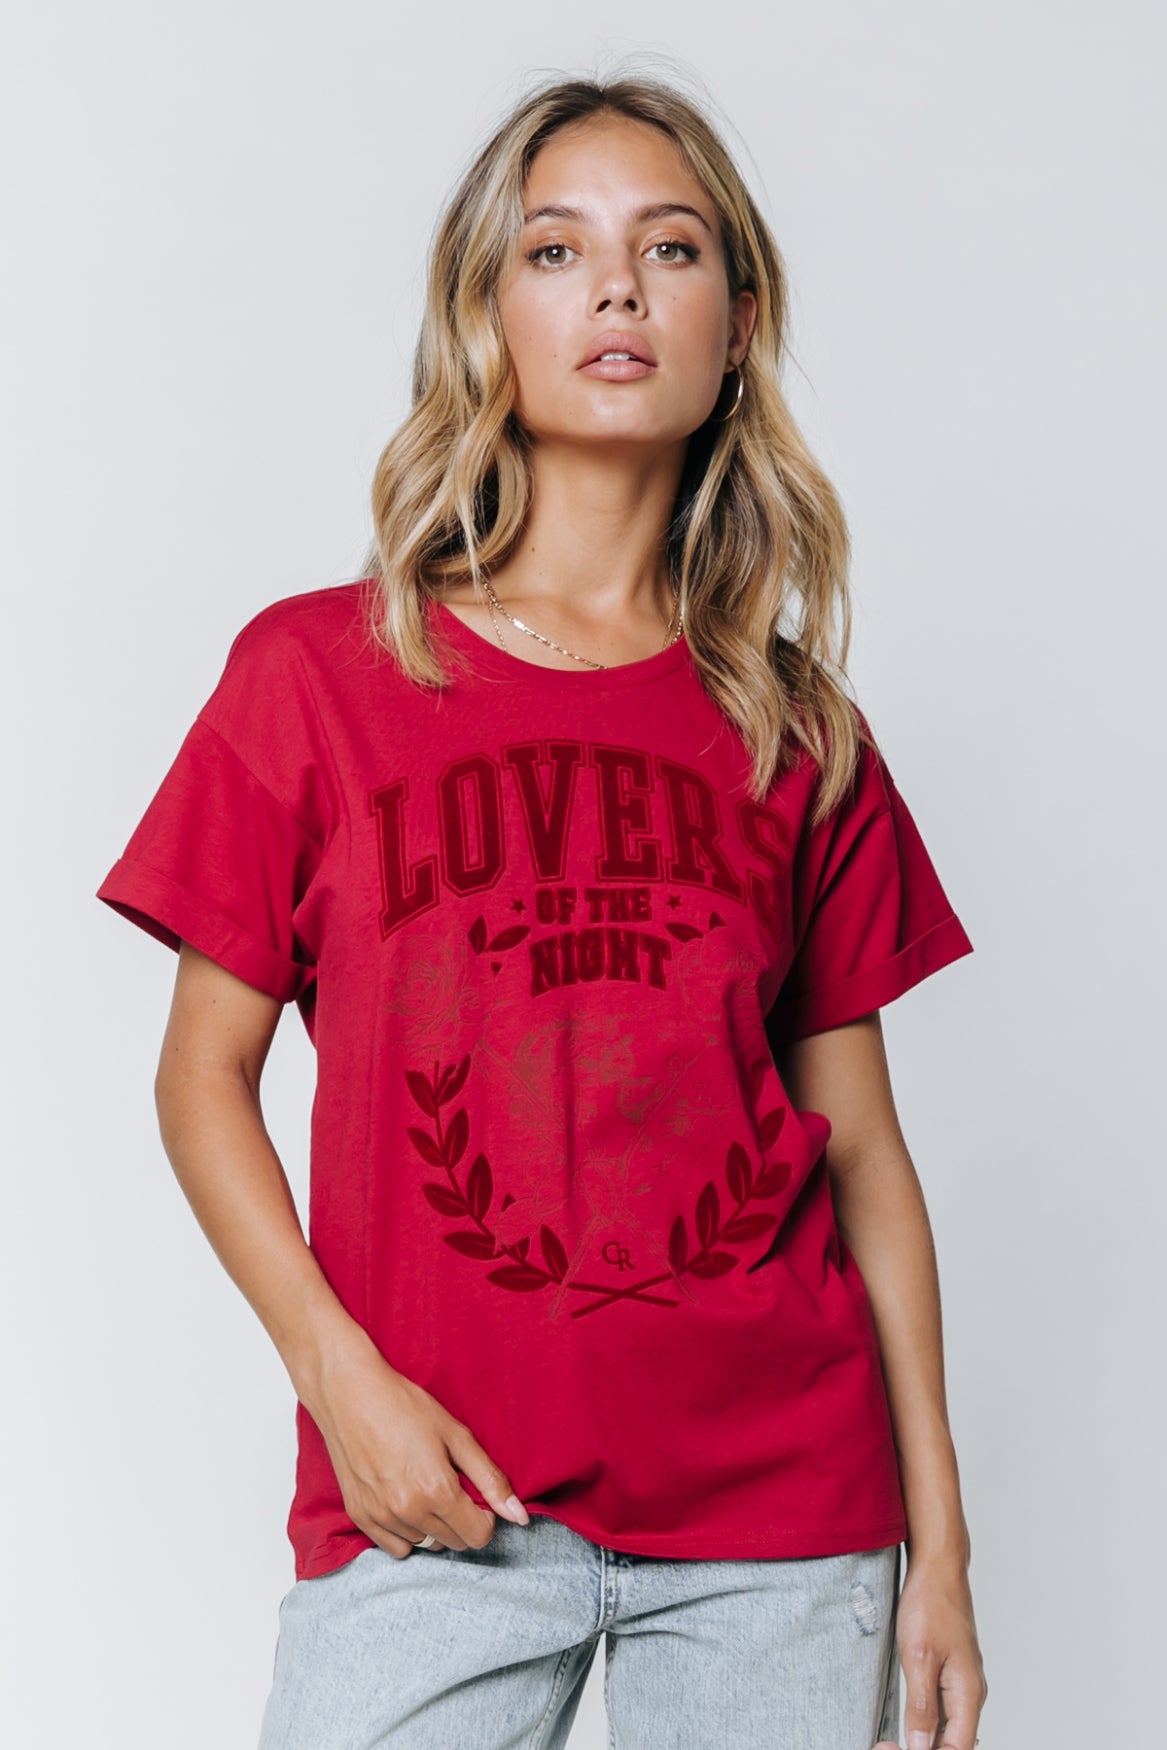 Colourful Rebel Lovers Of The Night Boxy Tee | Dark red 8720603258470